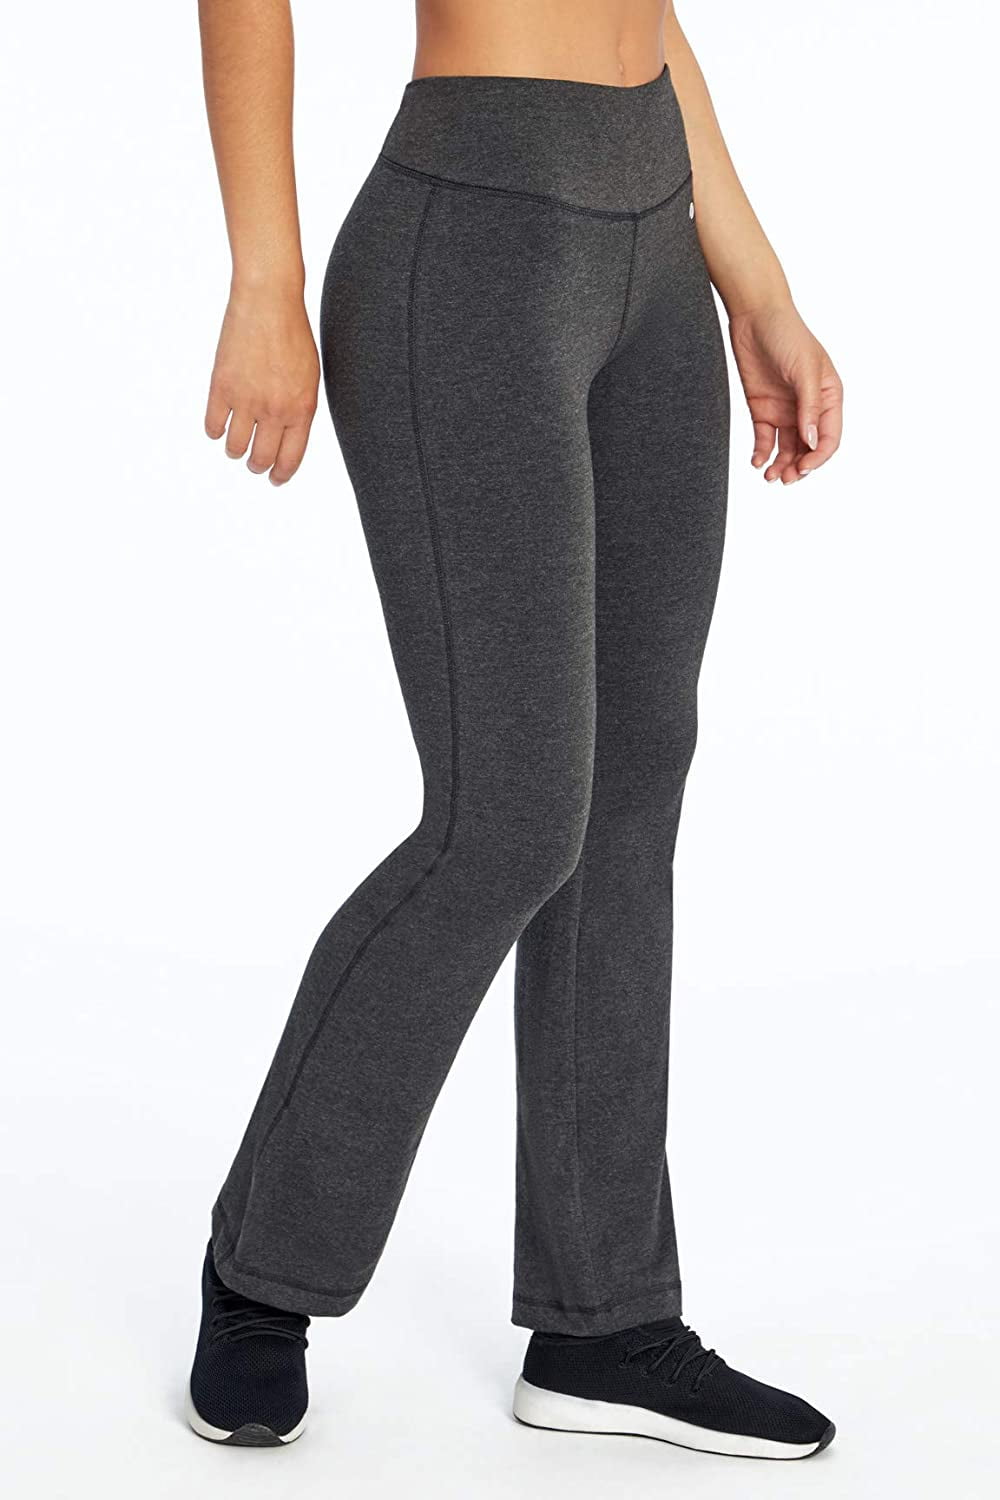 FLYILY Patterned Yoga Pants for Womens High Waist  Ubuy India